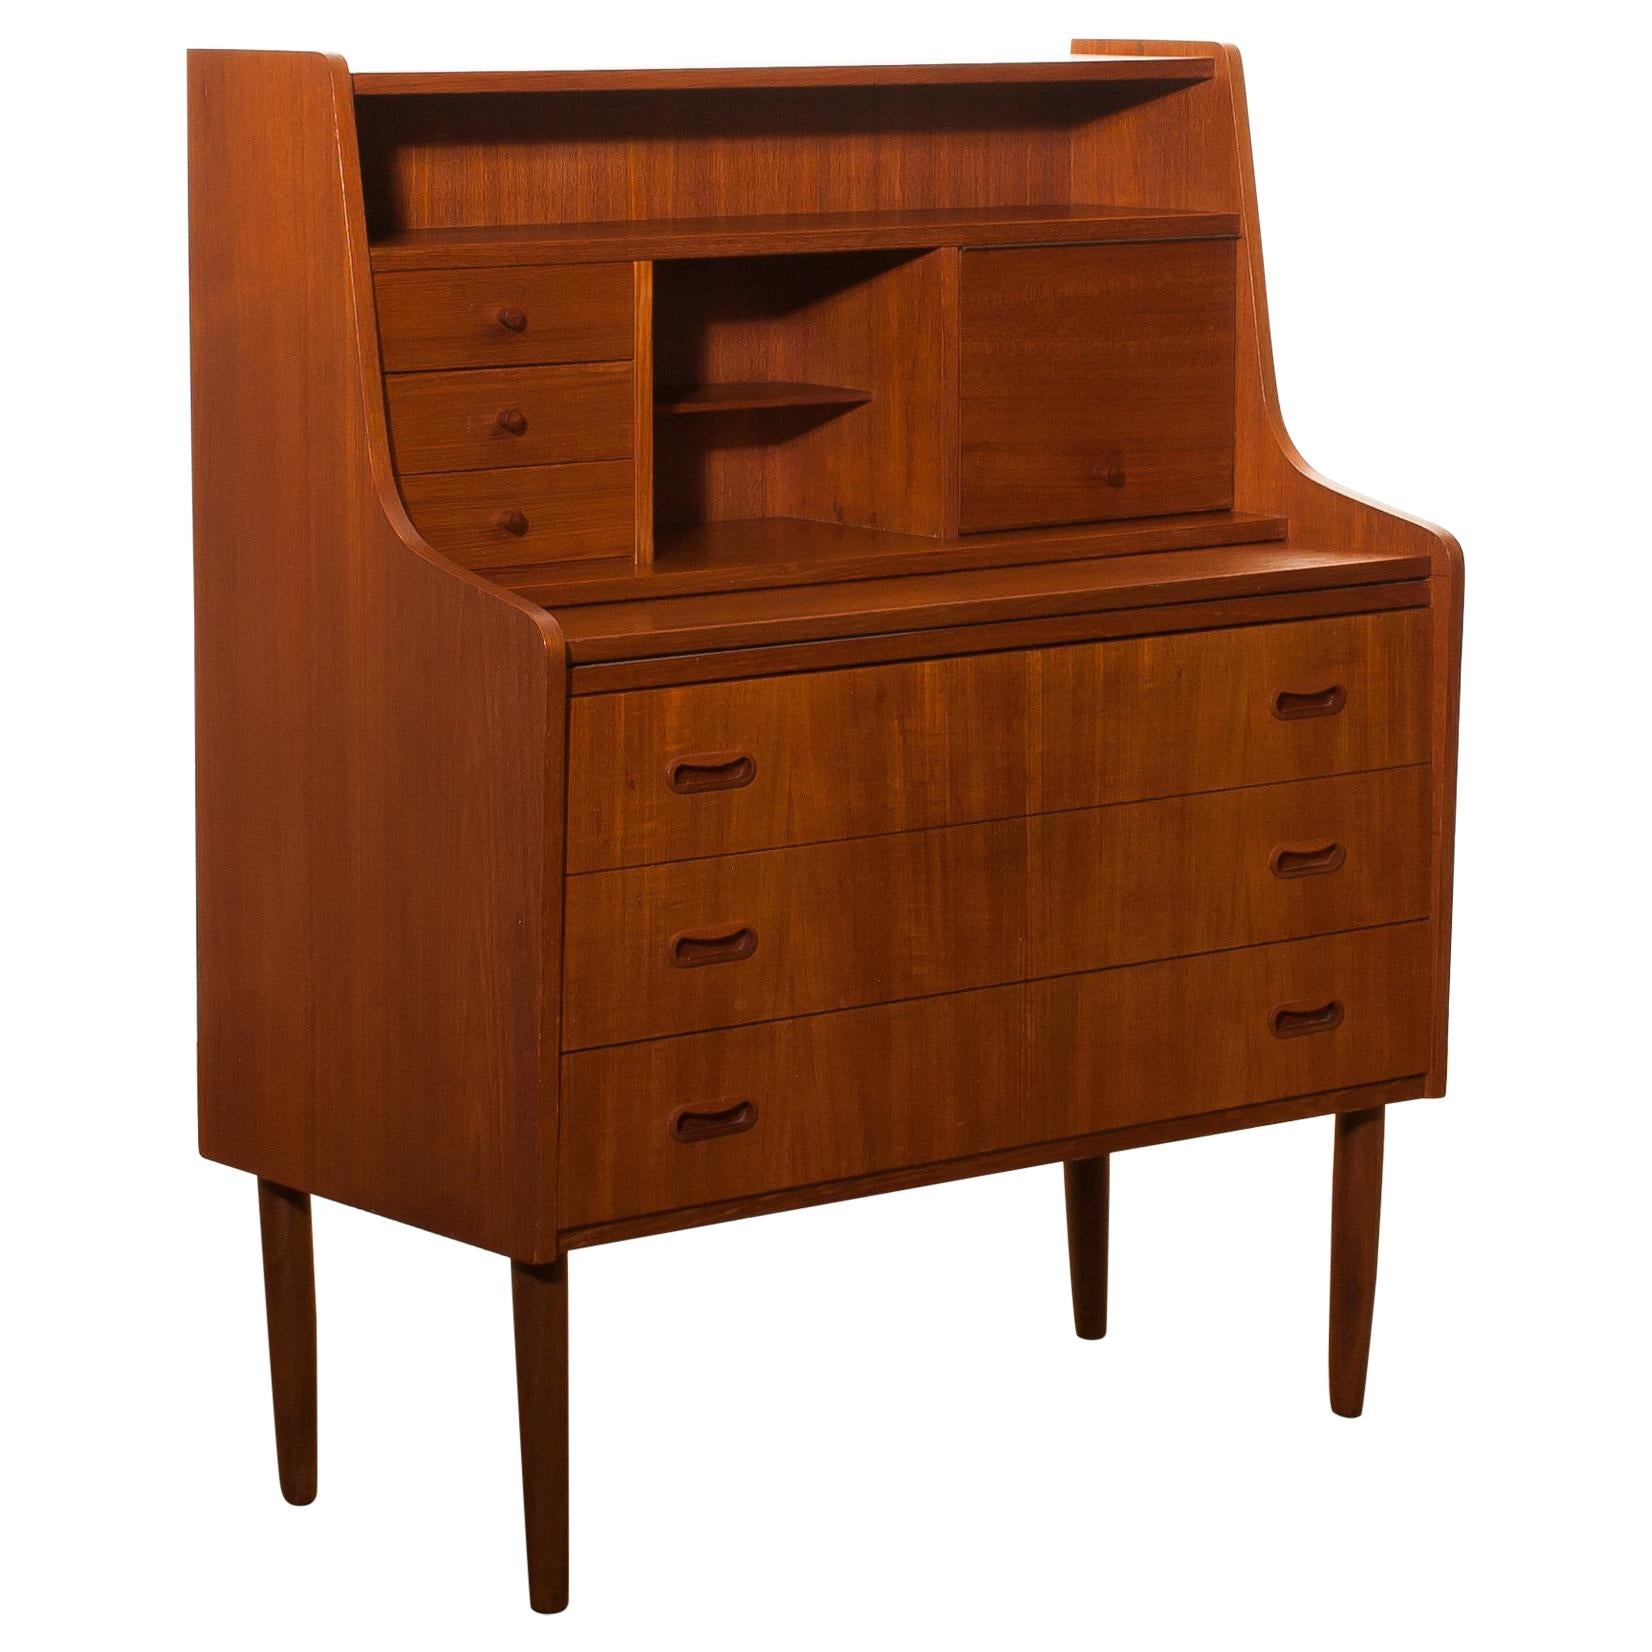 Beautiful secretaire or dressing table in the style of Peter Hvind.
The secretaire is made of teak and has a lot of storage space, an extendable writing space and a mirror.
It is in wonderful condition.
Period 1950s.
Dimensions: H 110 cm (height